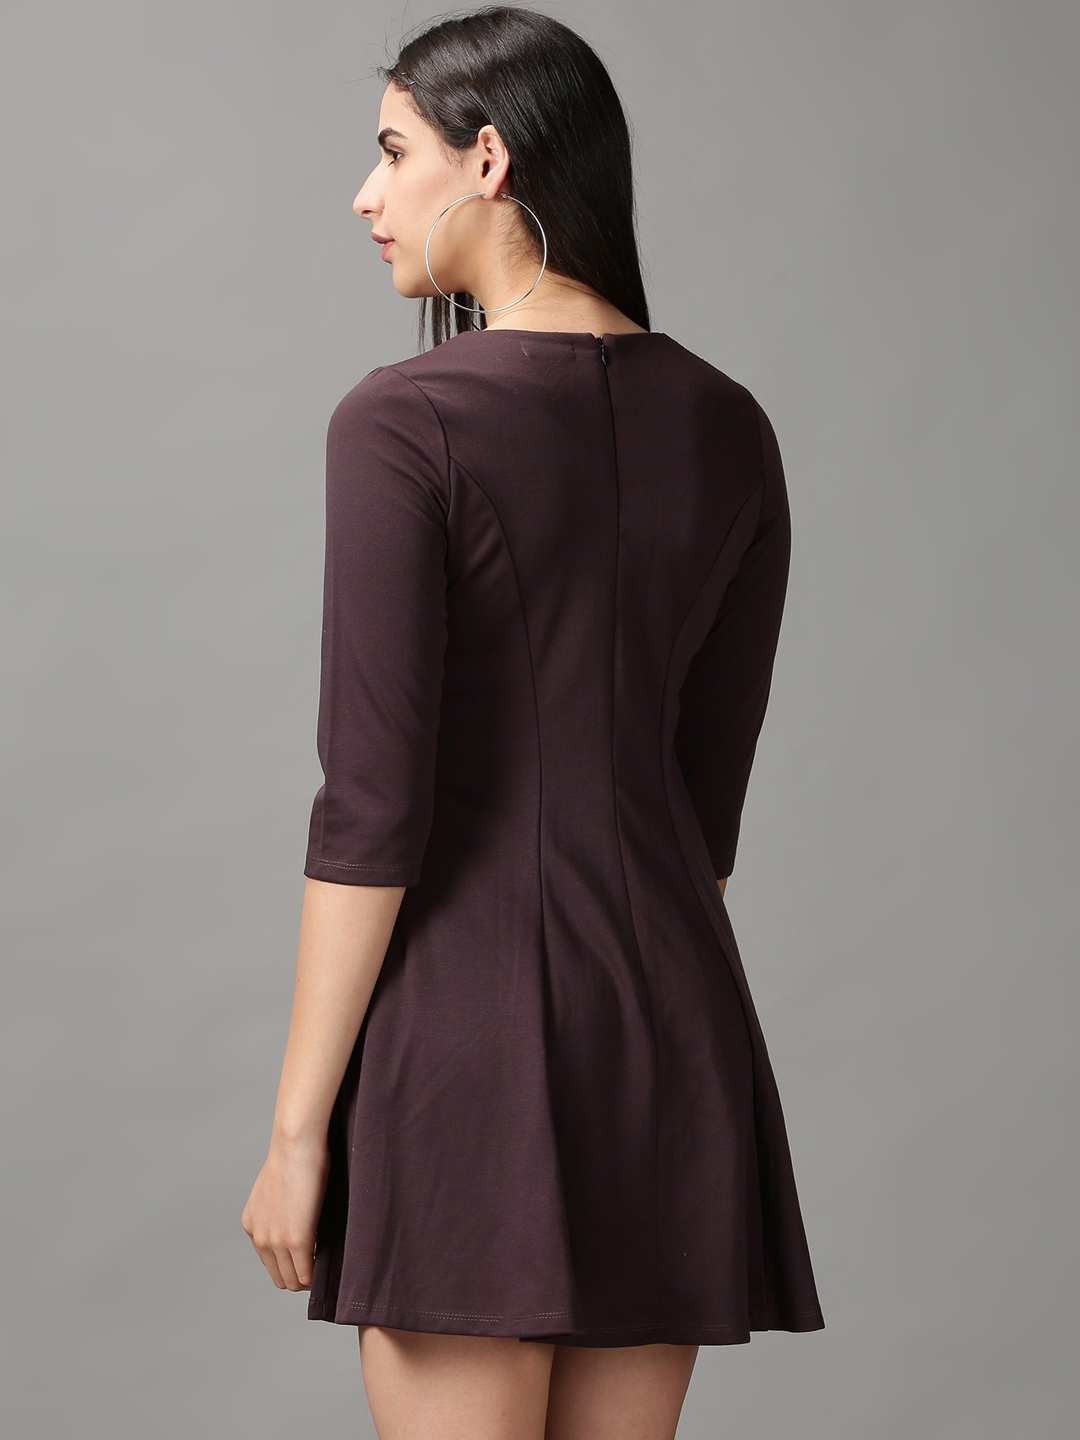 Women's Brown Polyester Solid Dresses